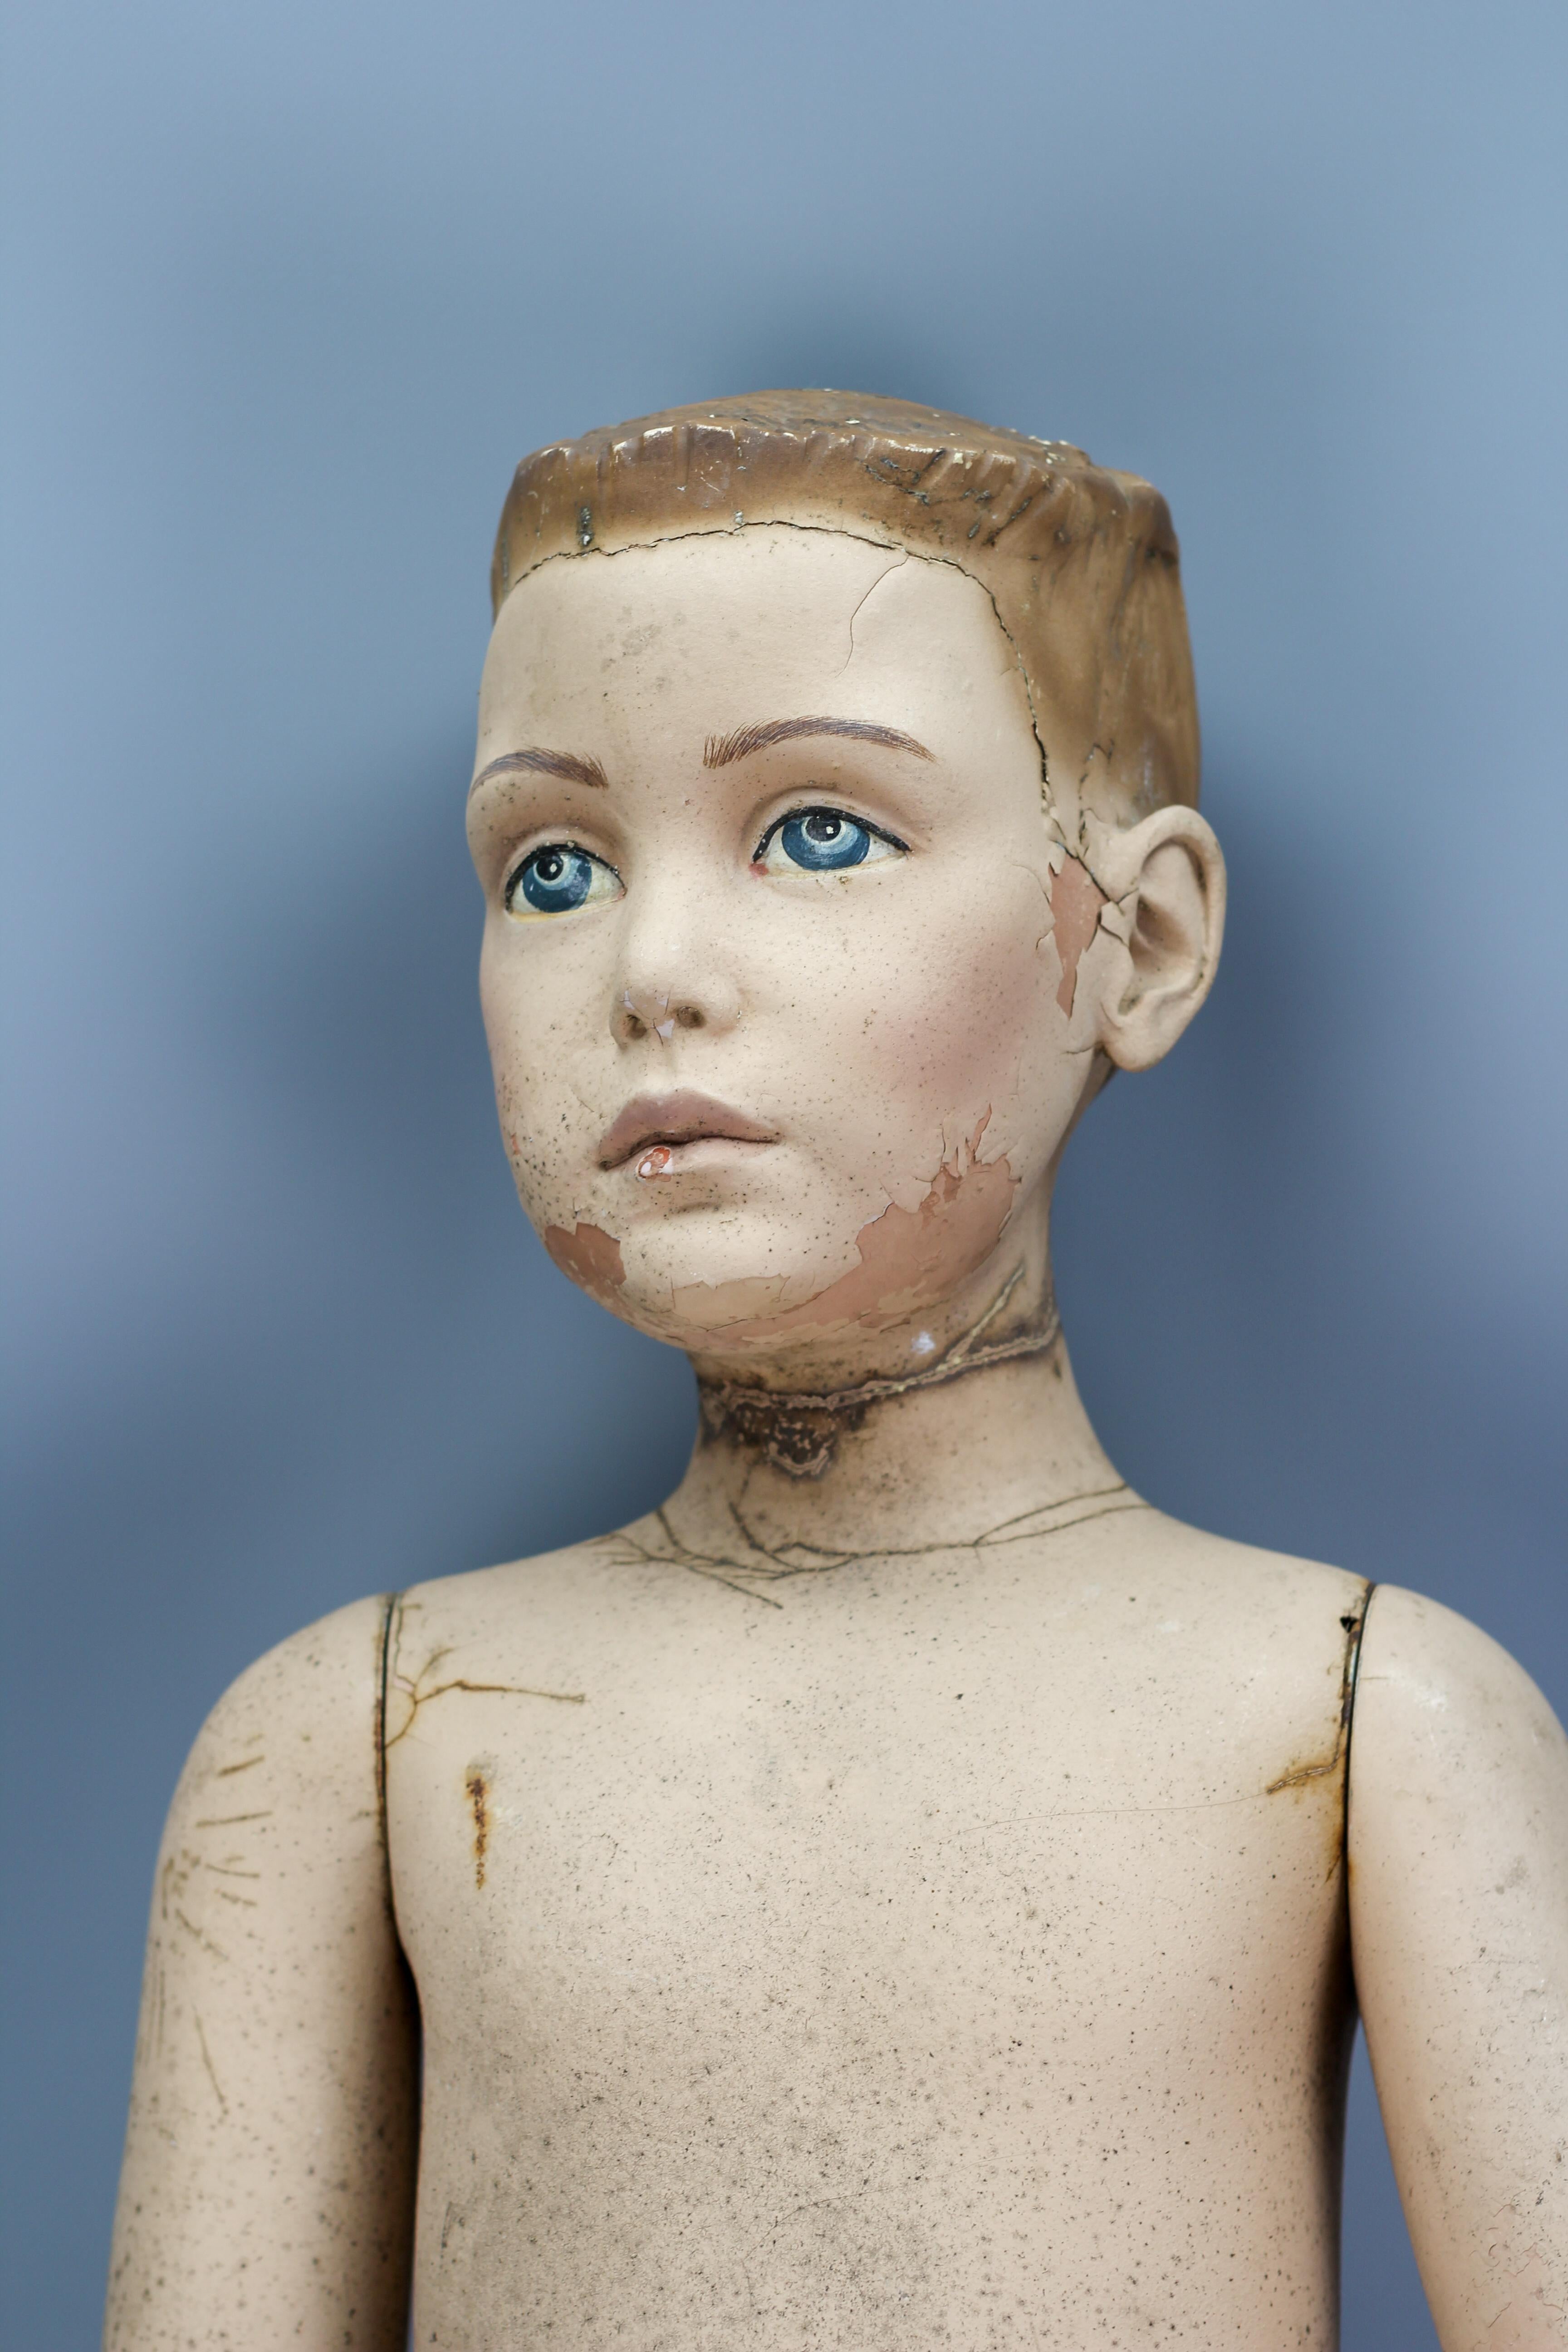 Life-size mannequin boy with blue eyes, circa the early 1980s, England, by Adel Rootstein.
An expressive life-size boy mannequin with beautifully hand-painted life-like blue eyes with an expressive look. Marked AJ8.
In good structural condition with